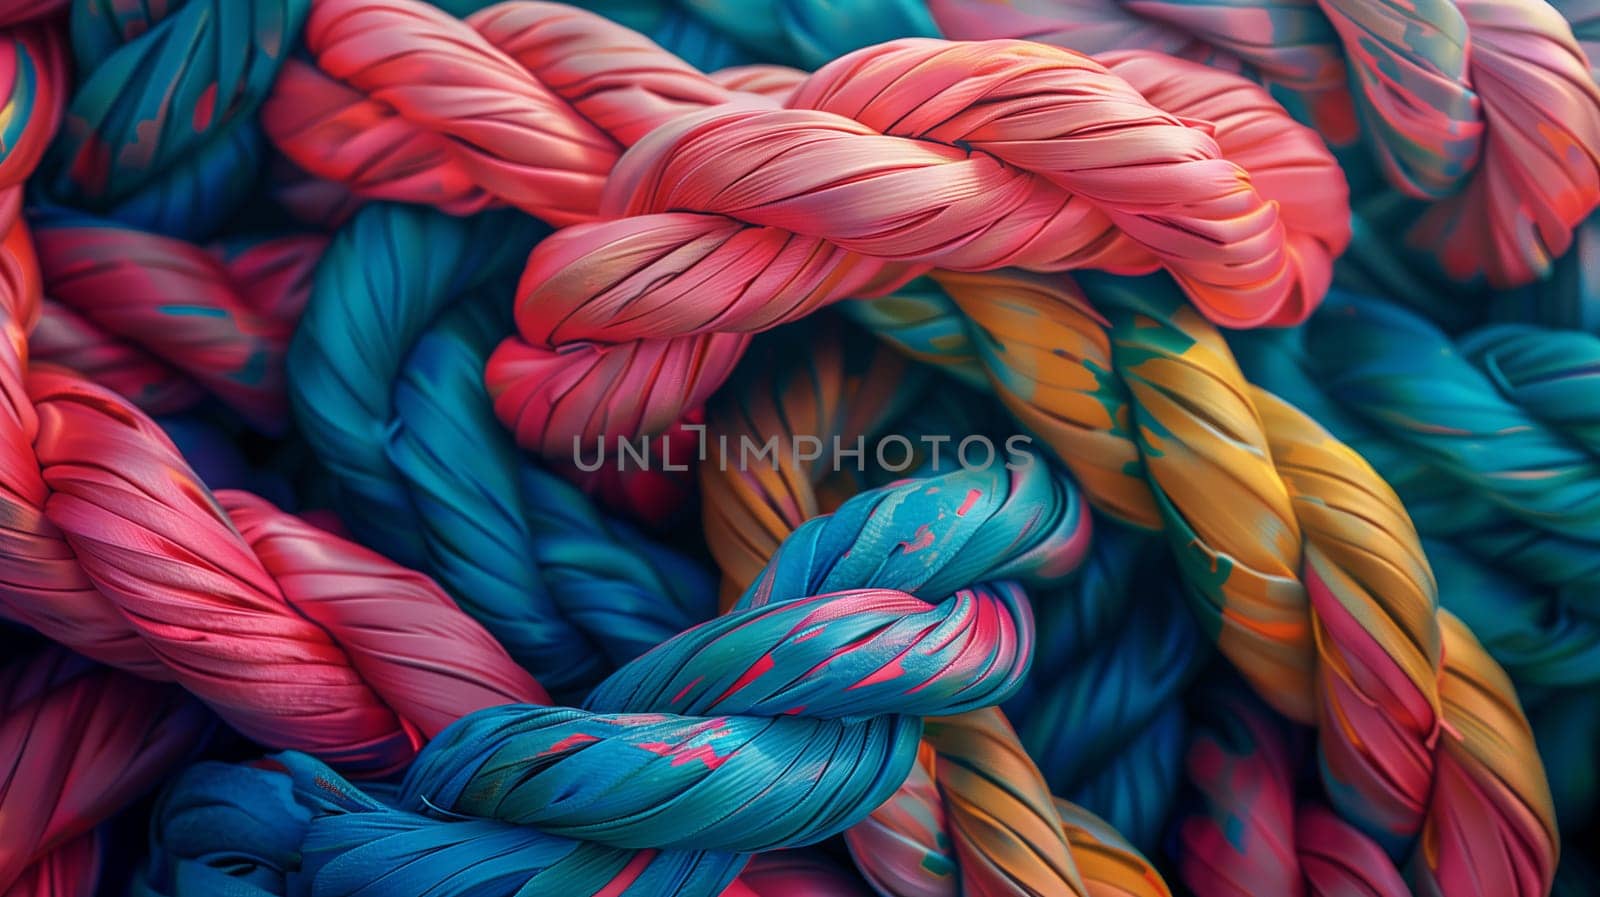 a close up of a pile of colorful ropes by richwolf